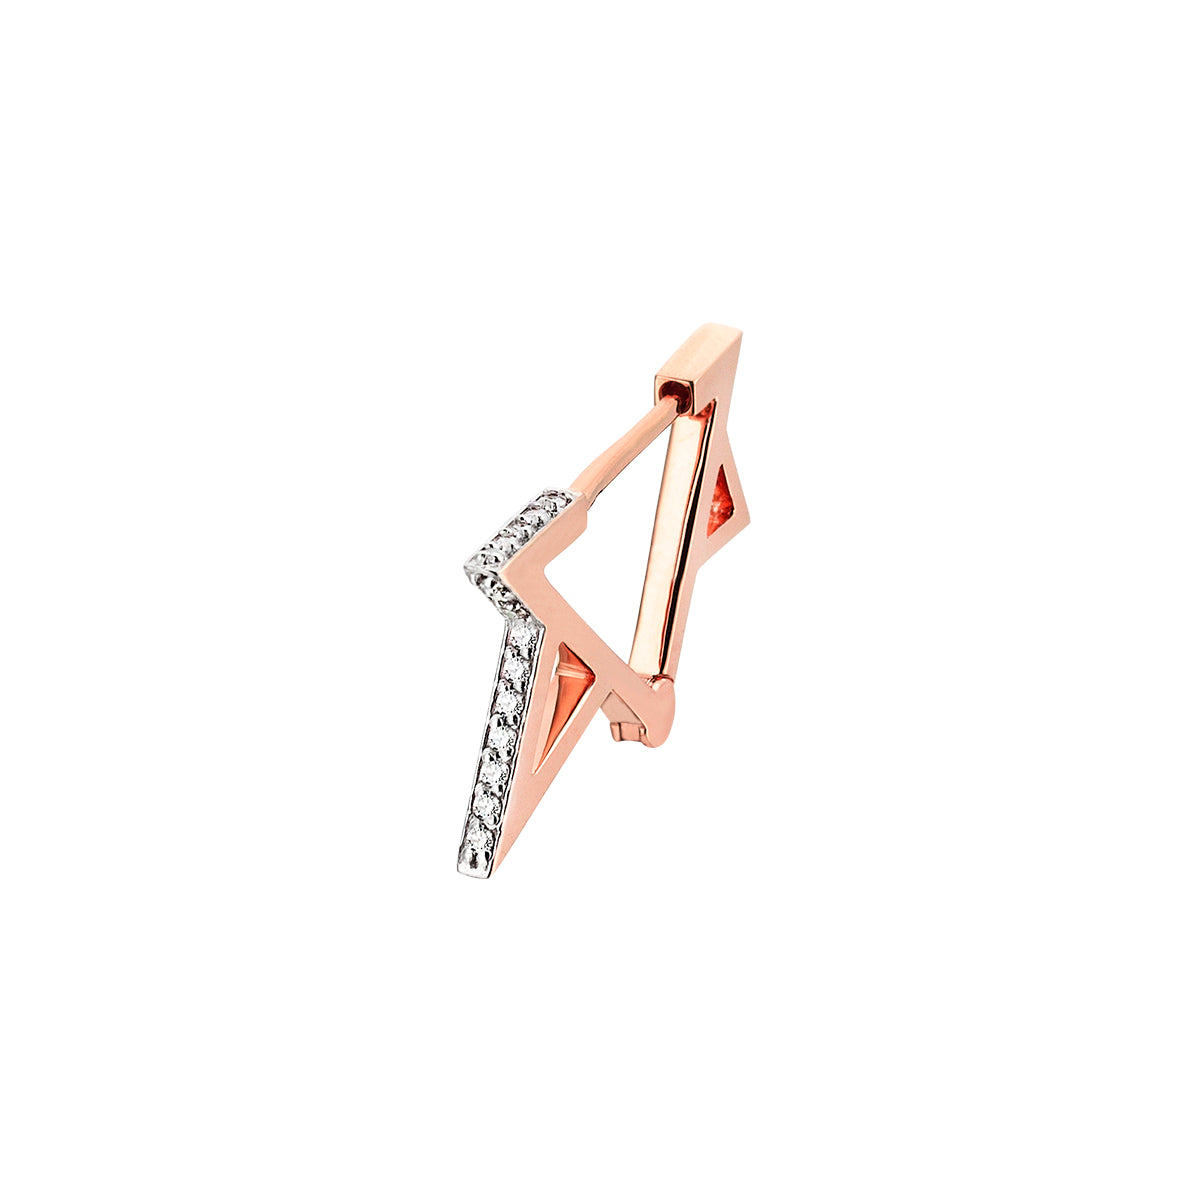 Mini Star Earring in Rose Gold - Her Story Shop